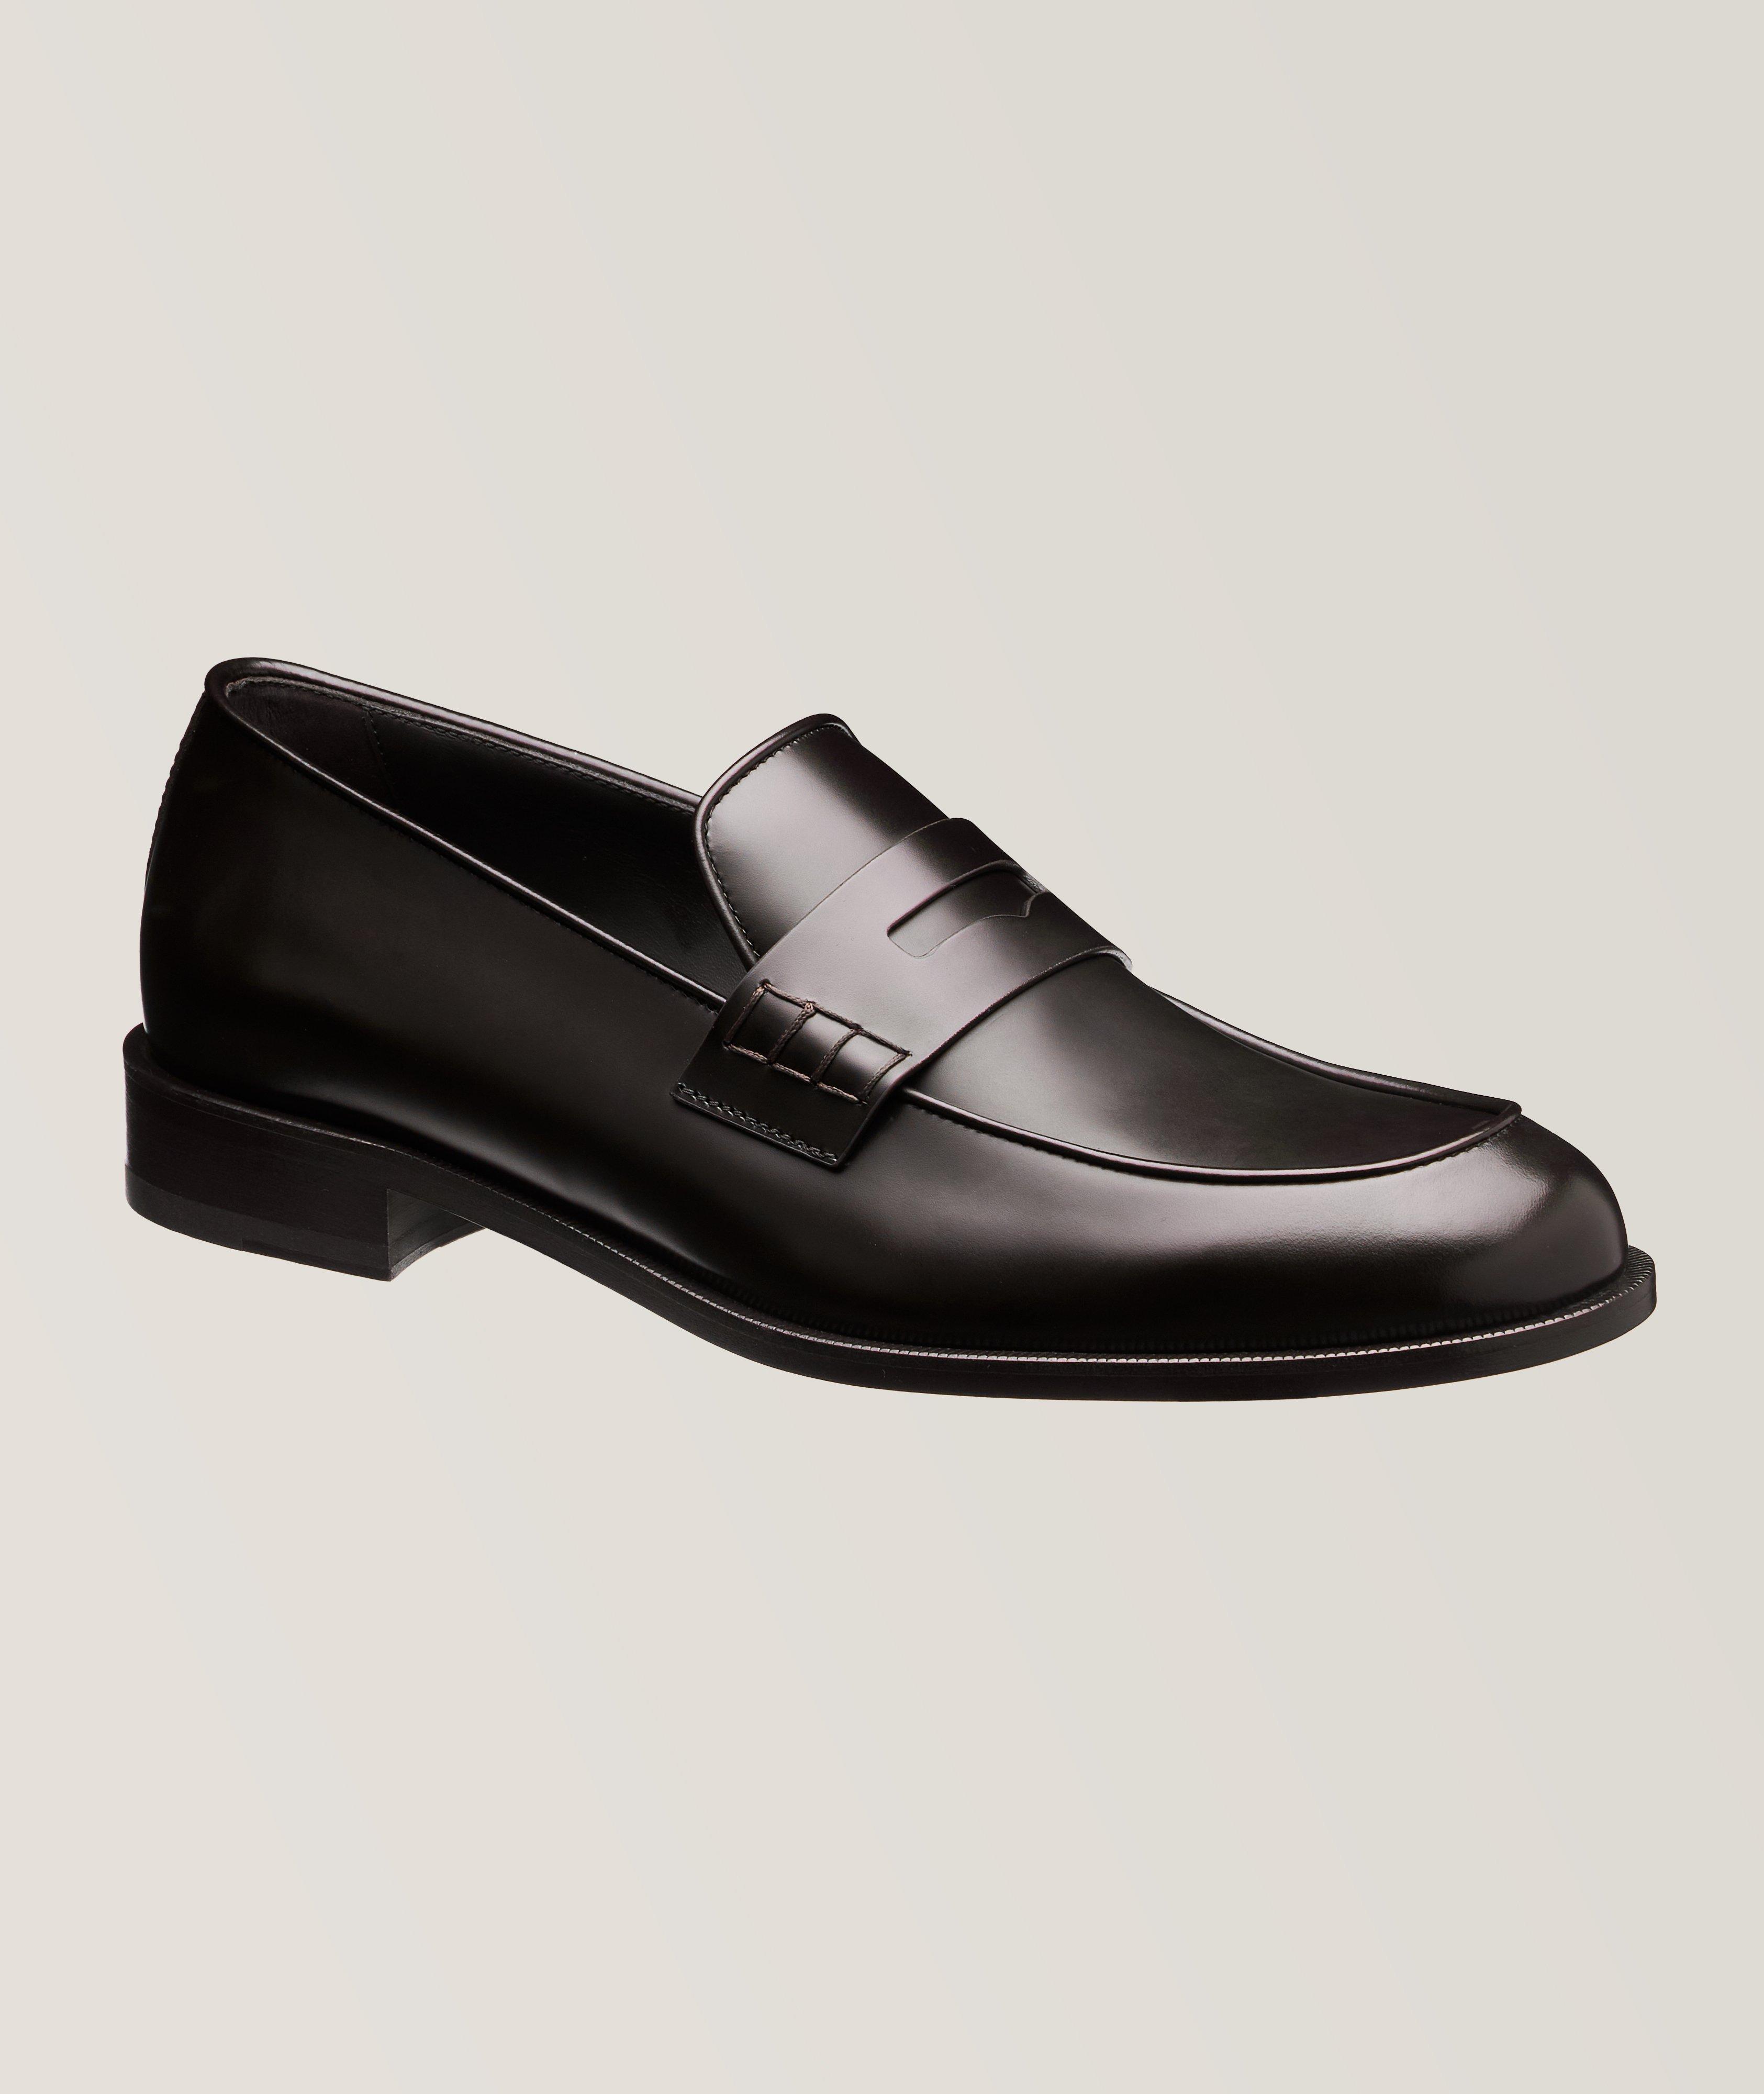 Leather Loafers image 0